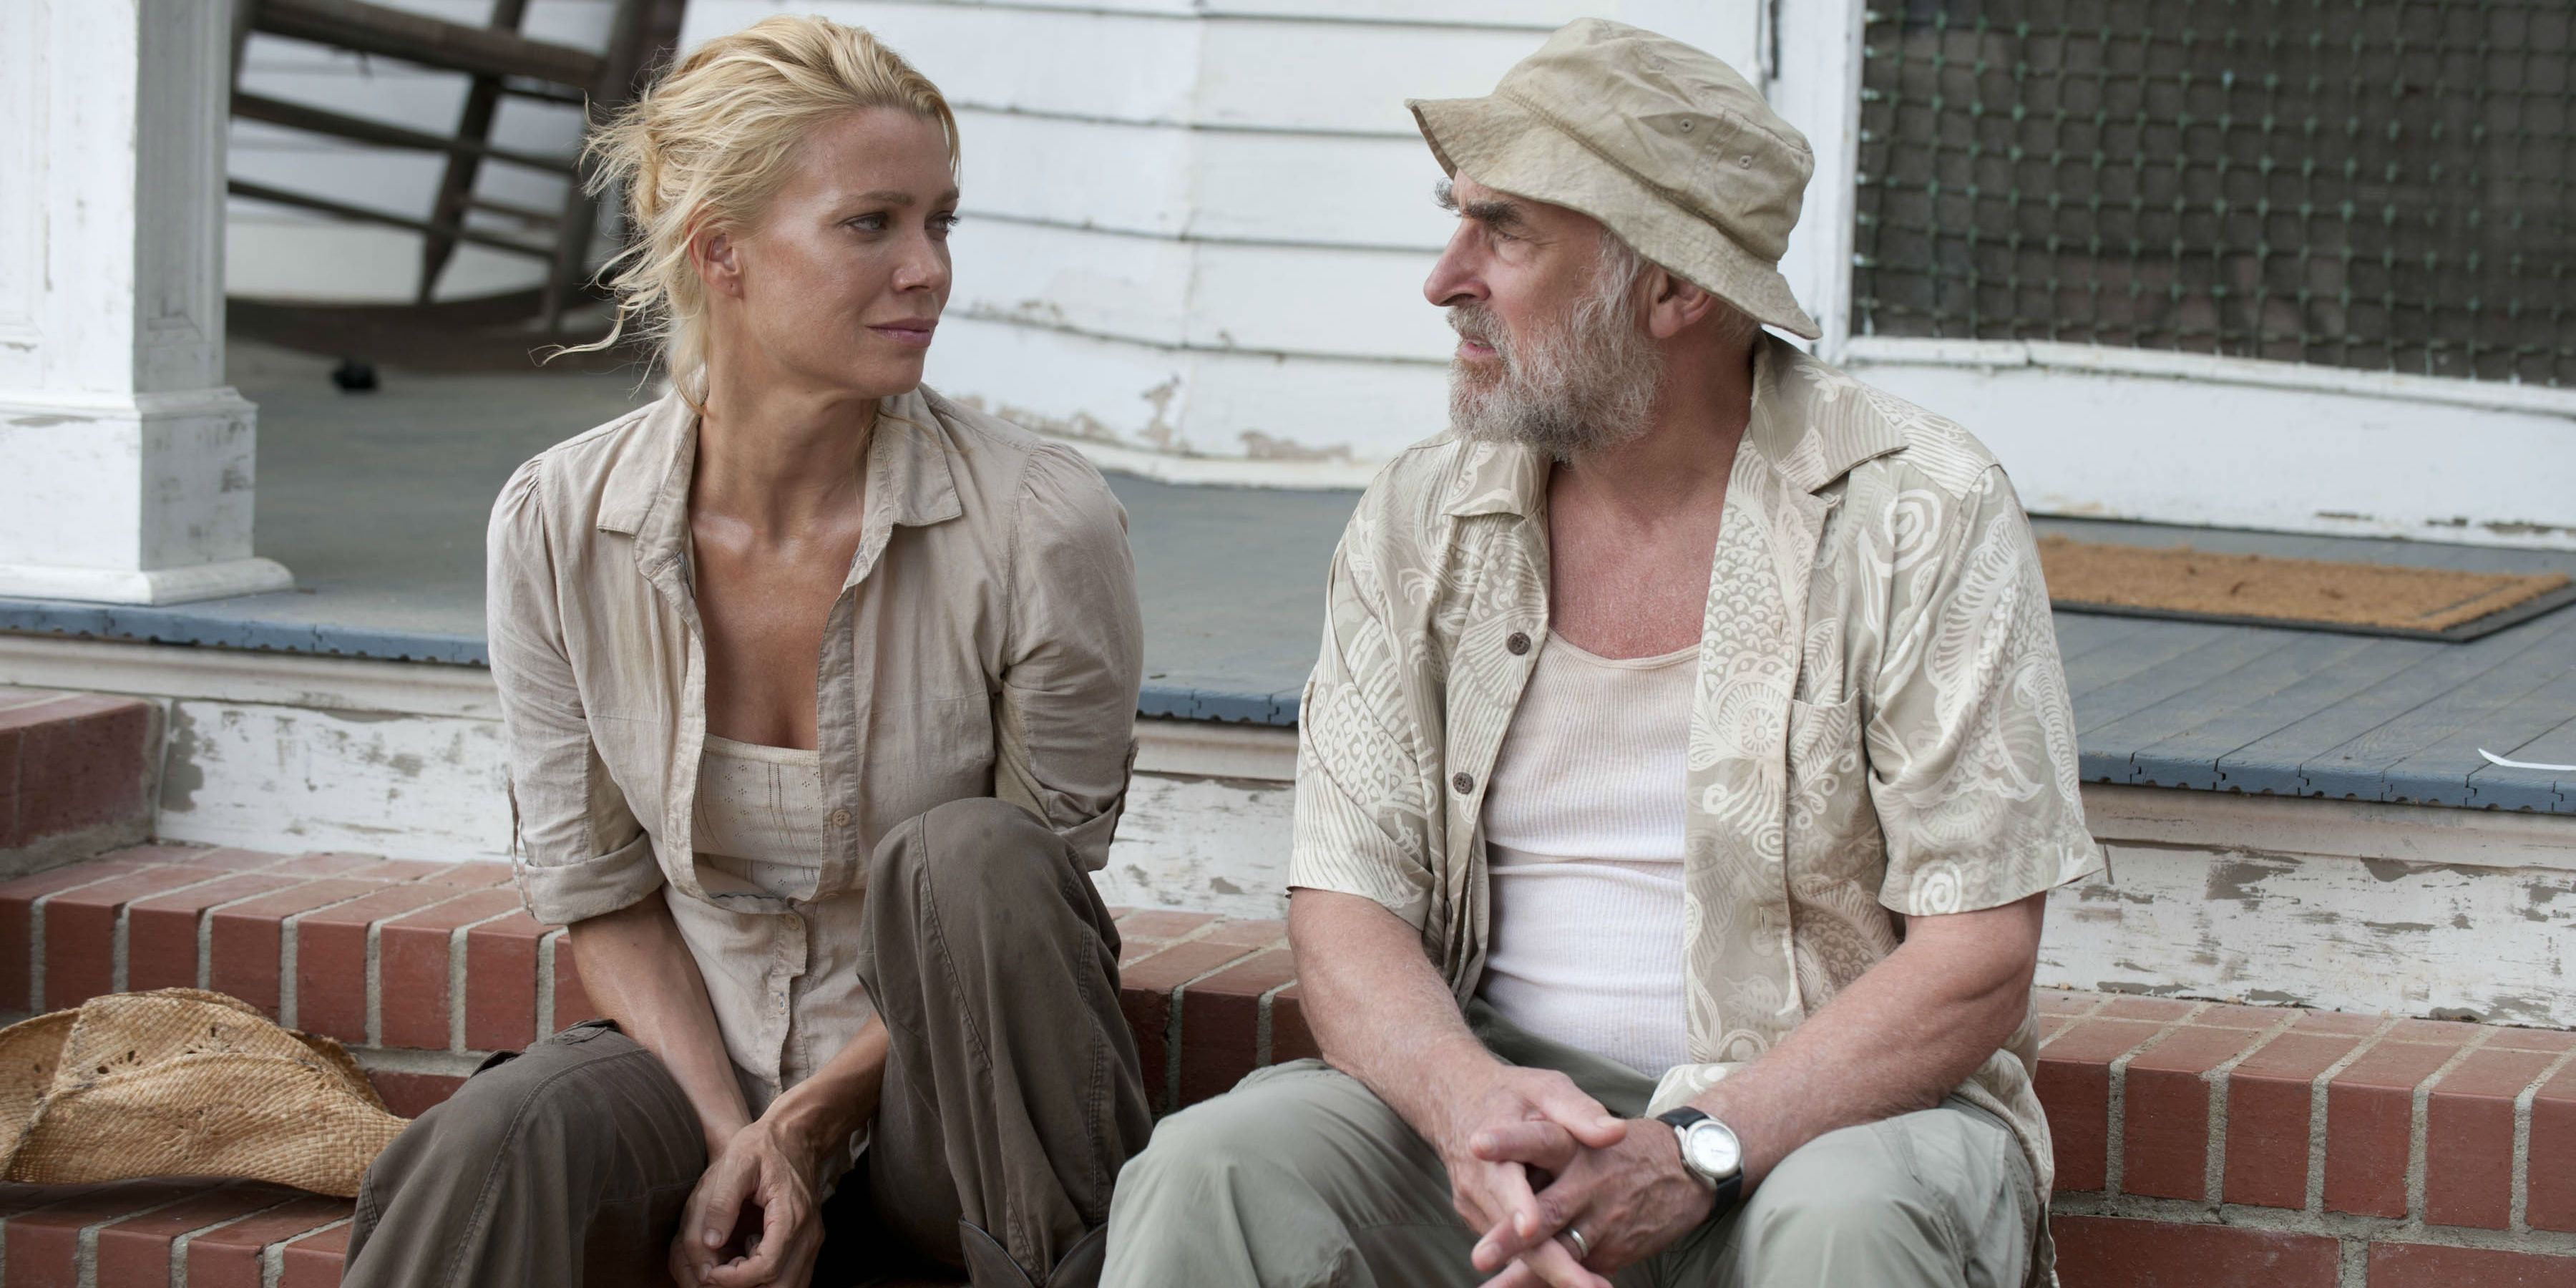 Andrea and Dale in The Walking Dead